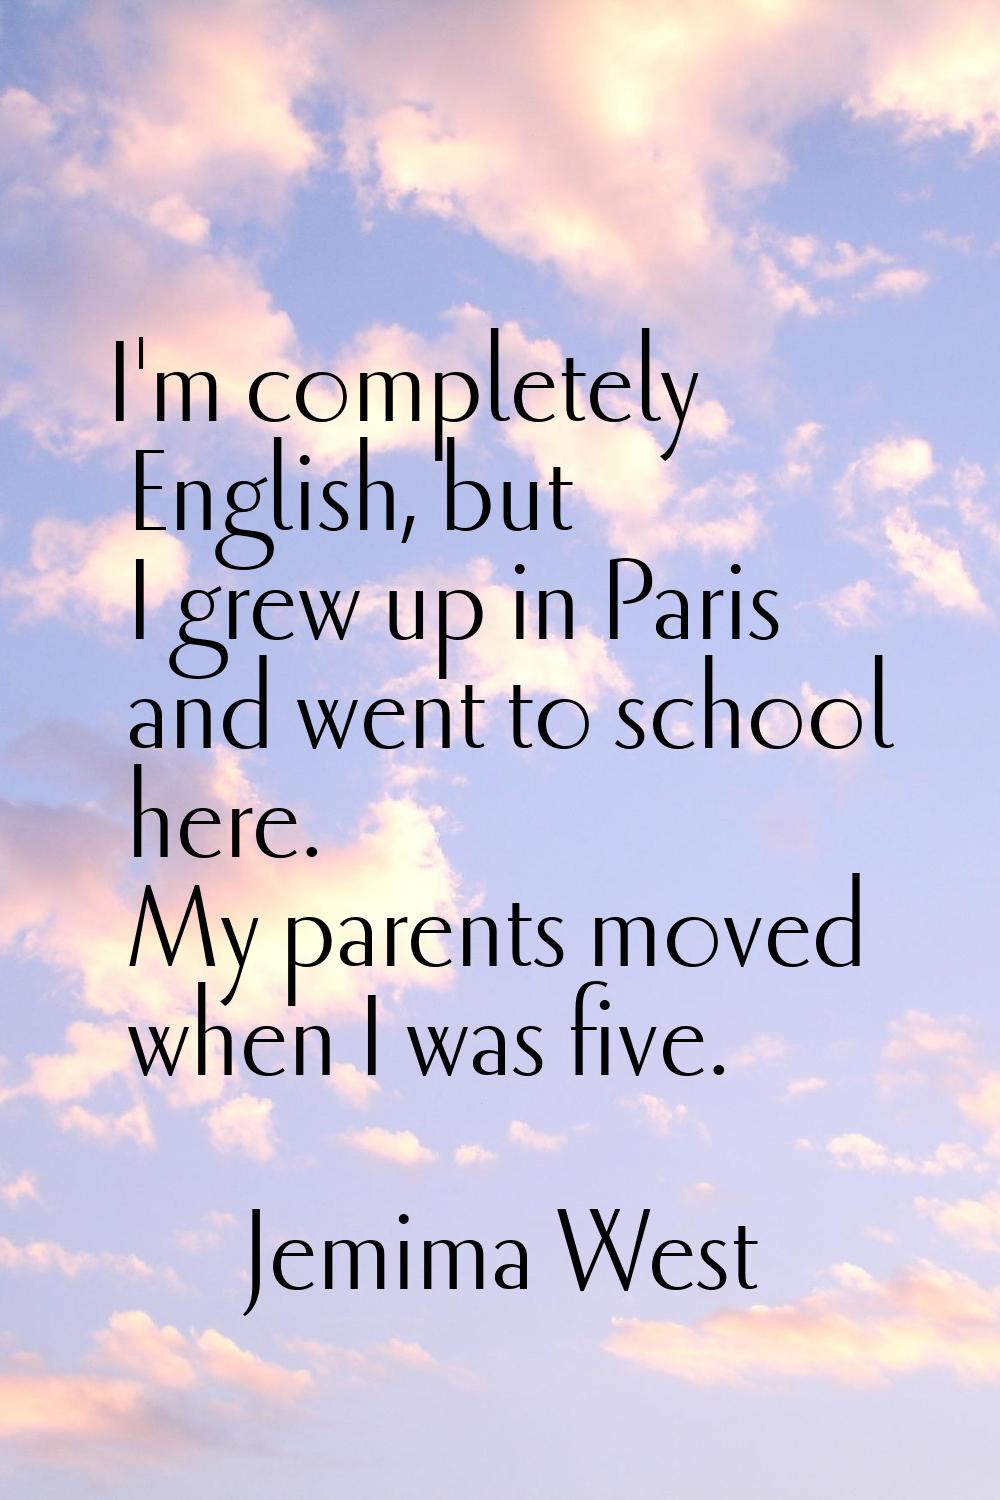 I'm completely English, but I grew up in Paris and went to school here. My parents moved when I was